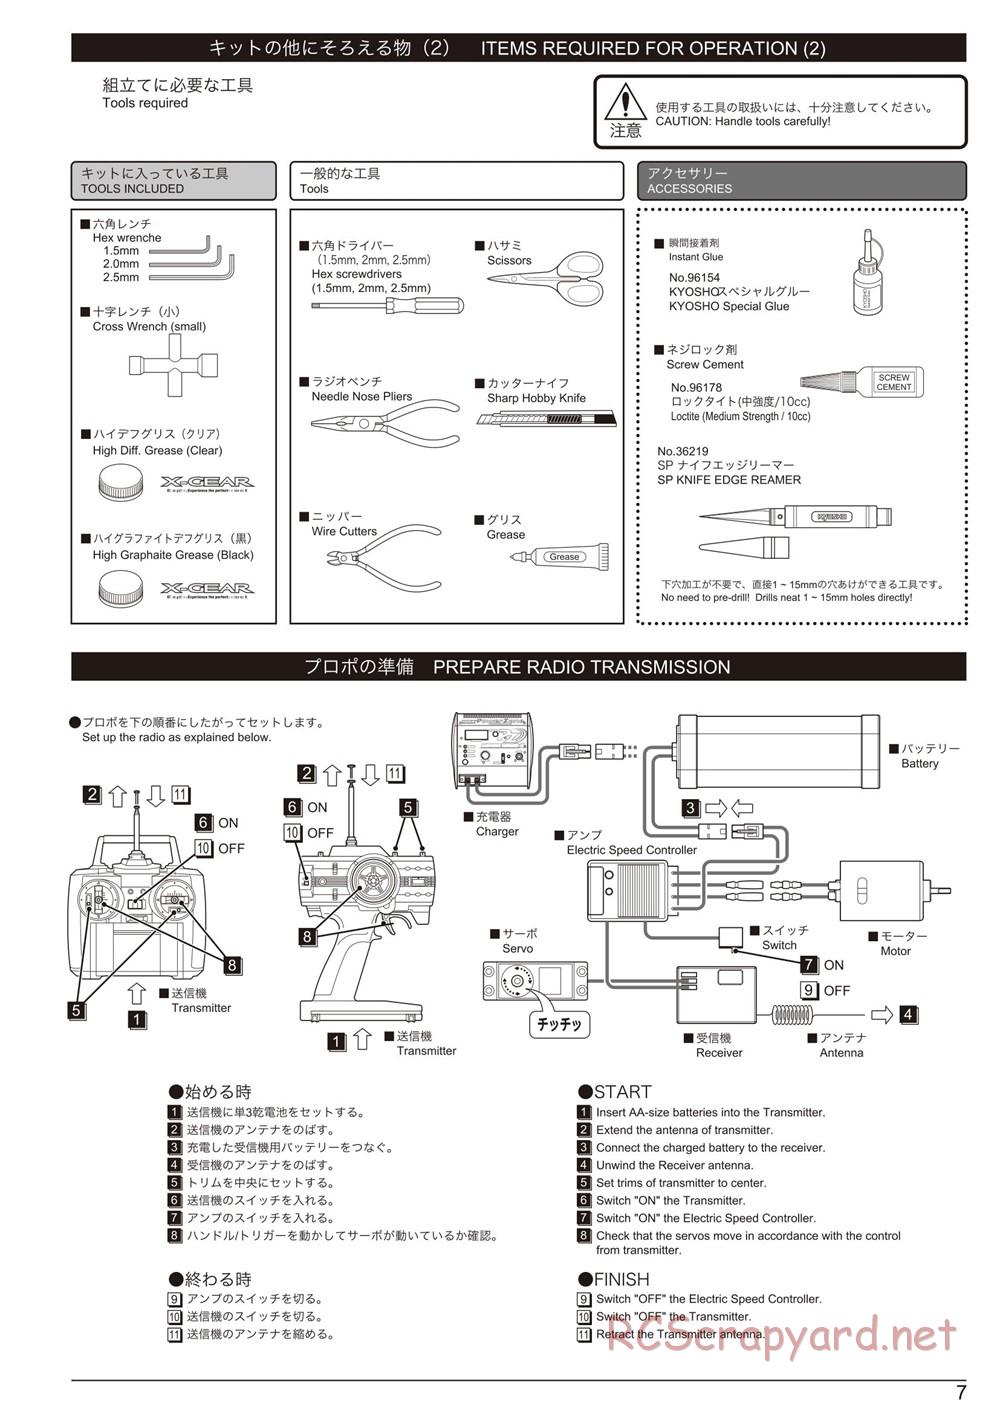 Kyosho - Ultima RB6 (2015) - Manual - Page 7